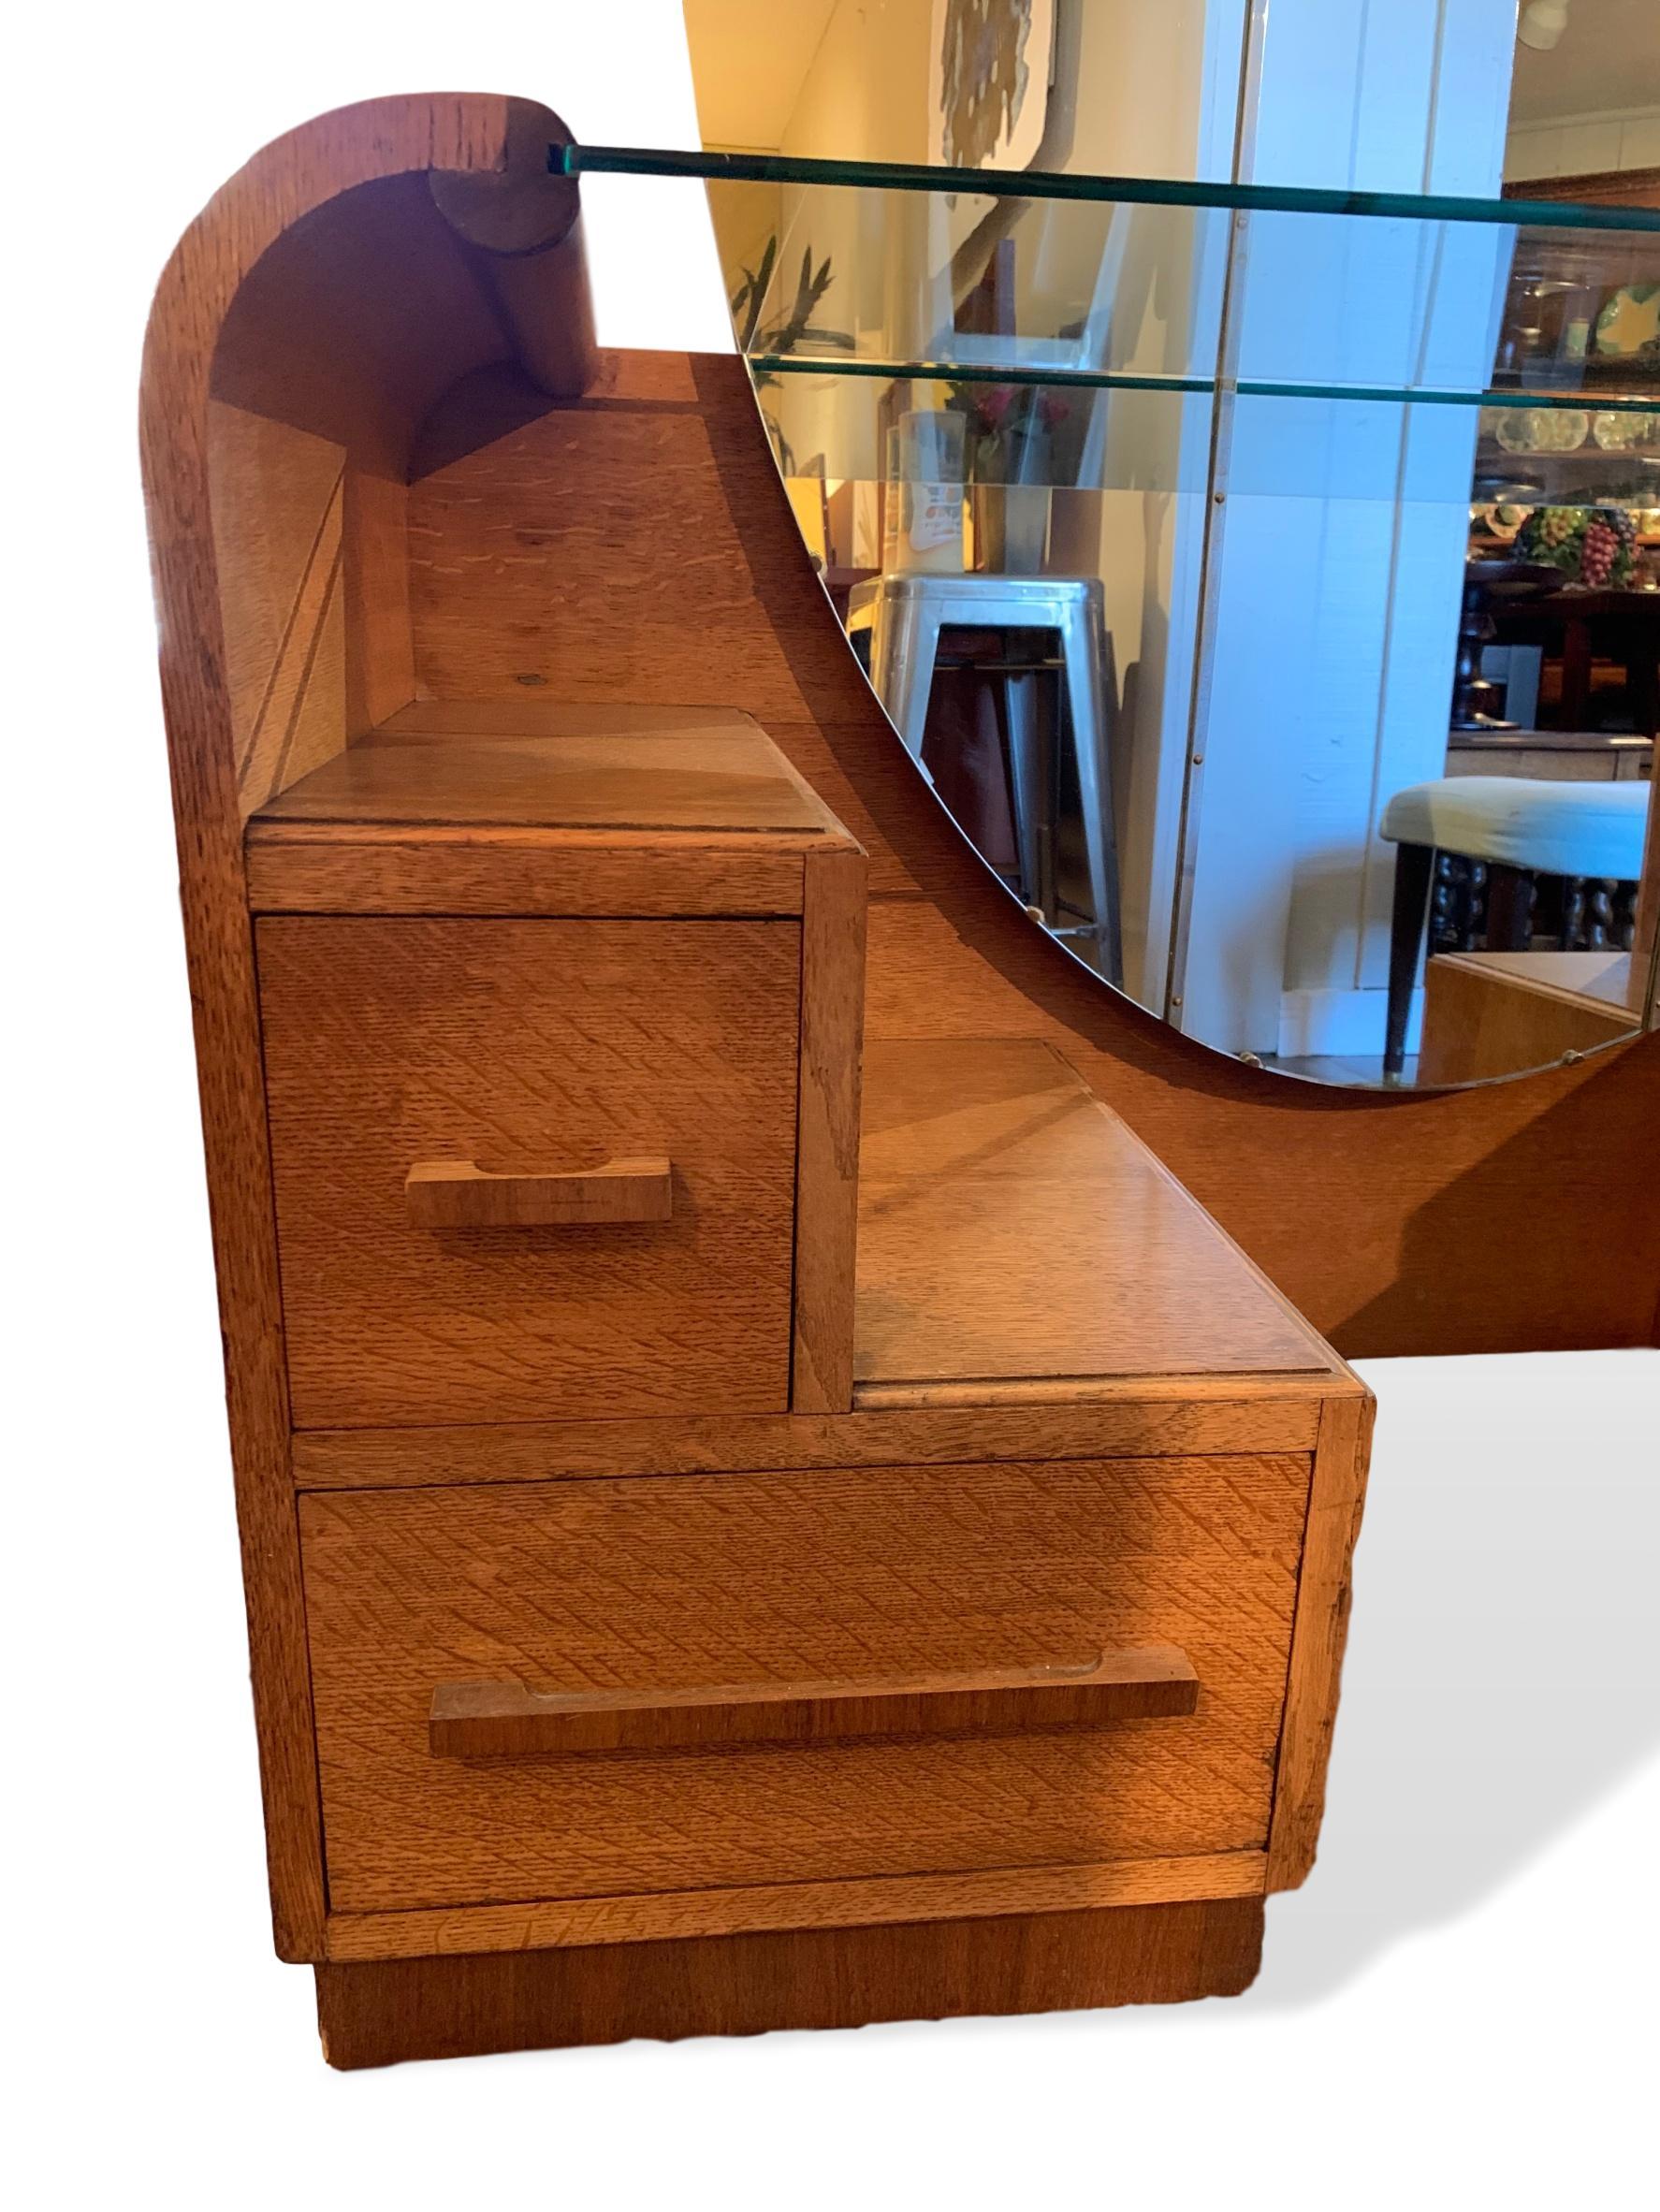 Art Deco golden oak mirrored vanity with drawers manufactured by English Company EG Furniture, 1940s. EG Furniture later became well known for their G-Plan Furniture range. Dresser/Vanity has four storage drawers with the top right having a small